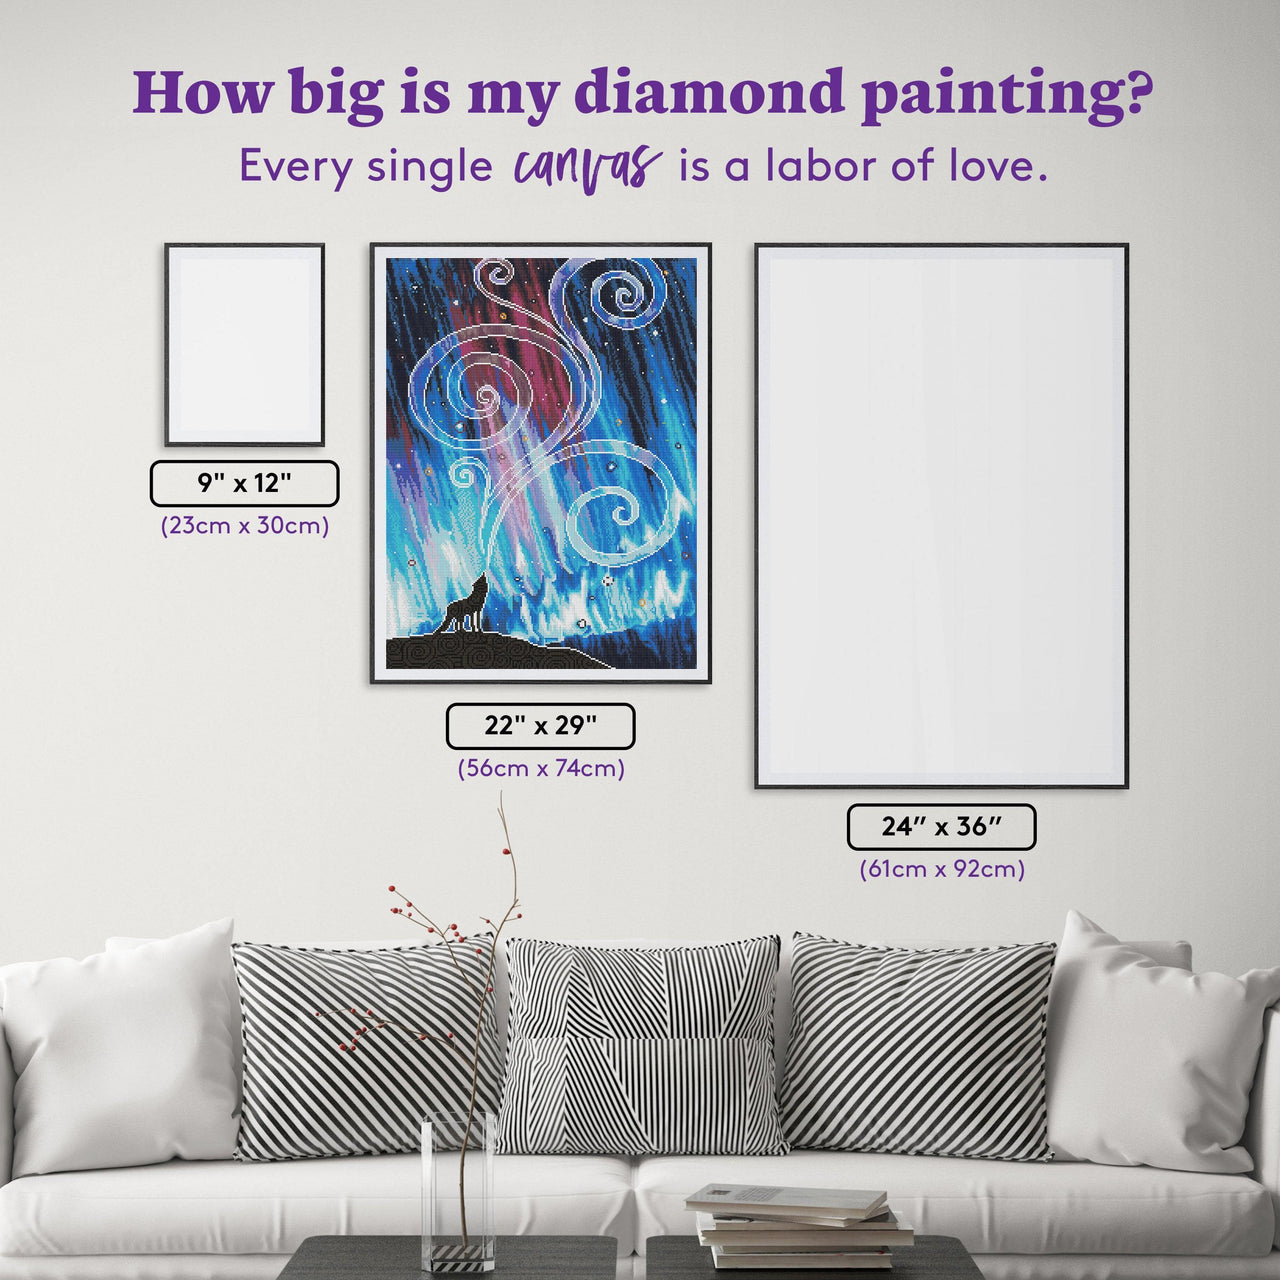 Diamond Painting Wolf Song 22" x 29" (56cm x 74cm) / Round With 33 Colors Including 4 ABs / 52,337